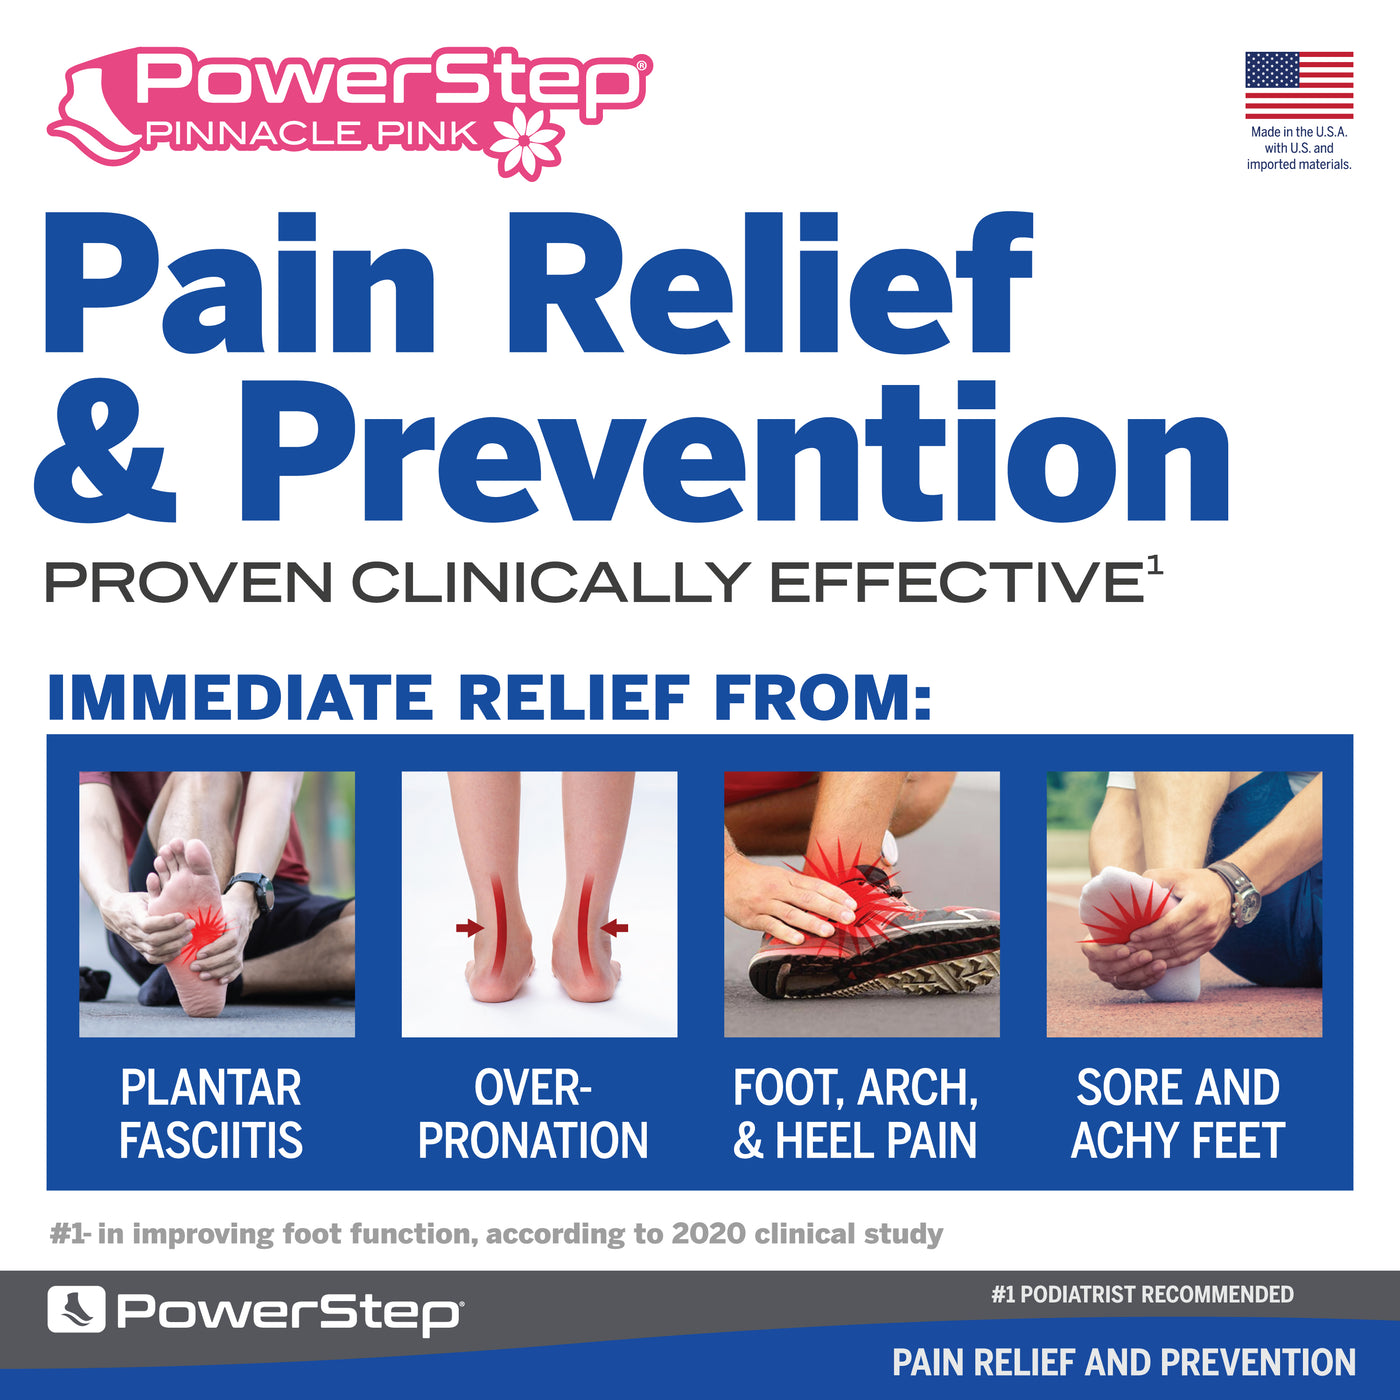 PowerStep Pinnacle Pink Orthotic Shoe Insoles, Made in the USA with US and imported materials, pain relief and prevention, proven clinically effective for immediate relief from plantar fasciitis, mild overpronation, foot, arch, and heel pain, sore, achy feet, number one in improving foot function according to 2020 clinical study, number one podiatrist recommended shoe orthotic for arch support, women’s shoe inserts, men’s orthotic shoe insoles, unisex orthotic arch support insoles